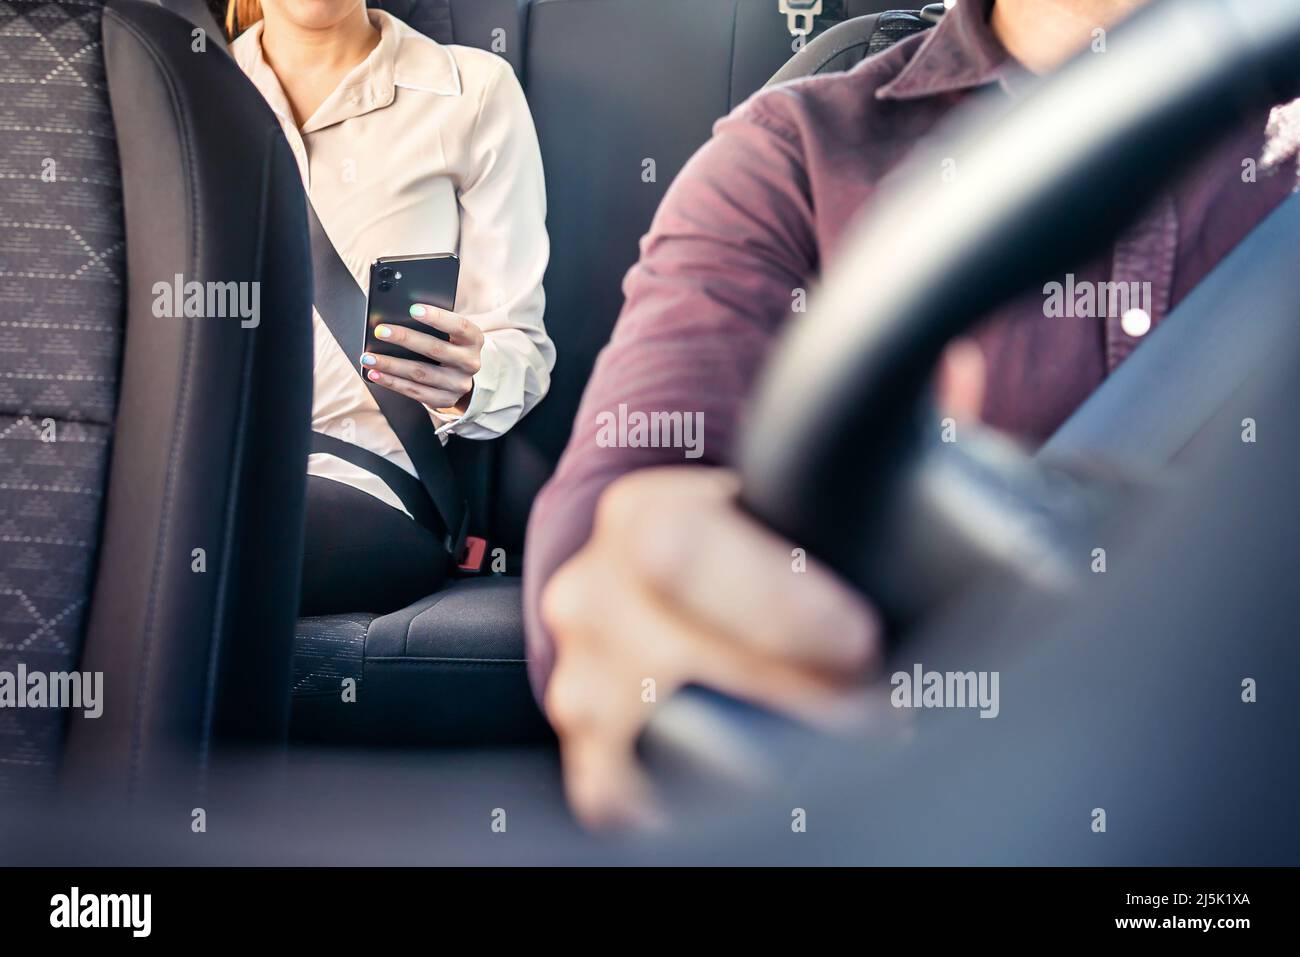 Phone in car or taxi. Passenger woman using cellphone in back seat of cab. Driver and customer. Rideshare mobile app. Professional business person. Stock Photo